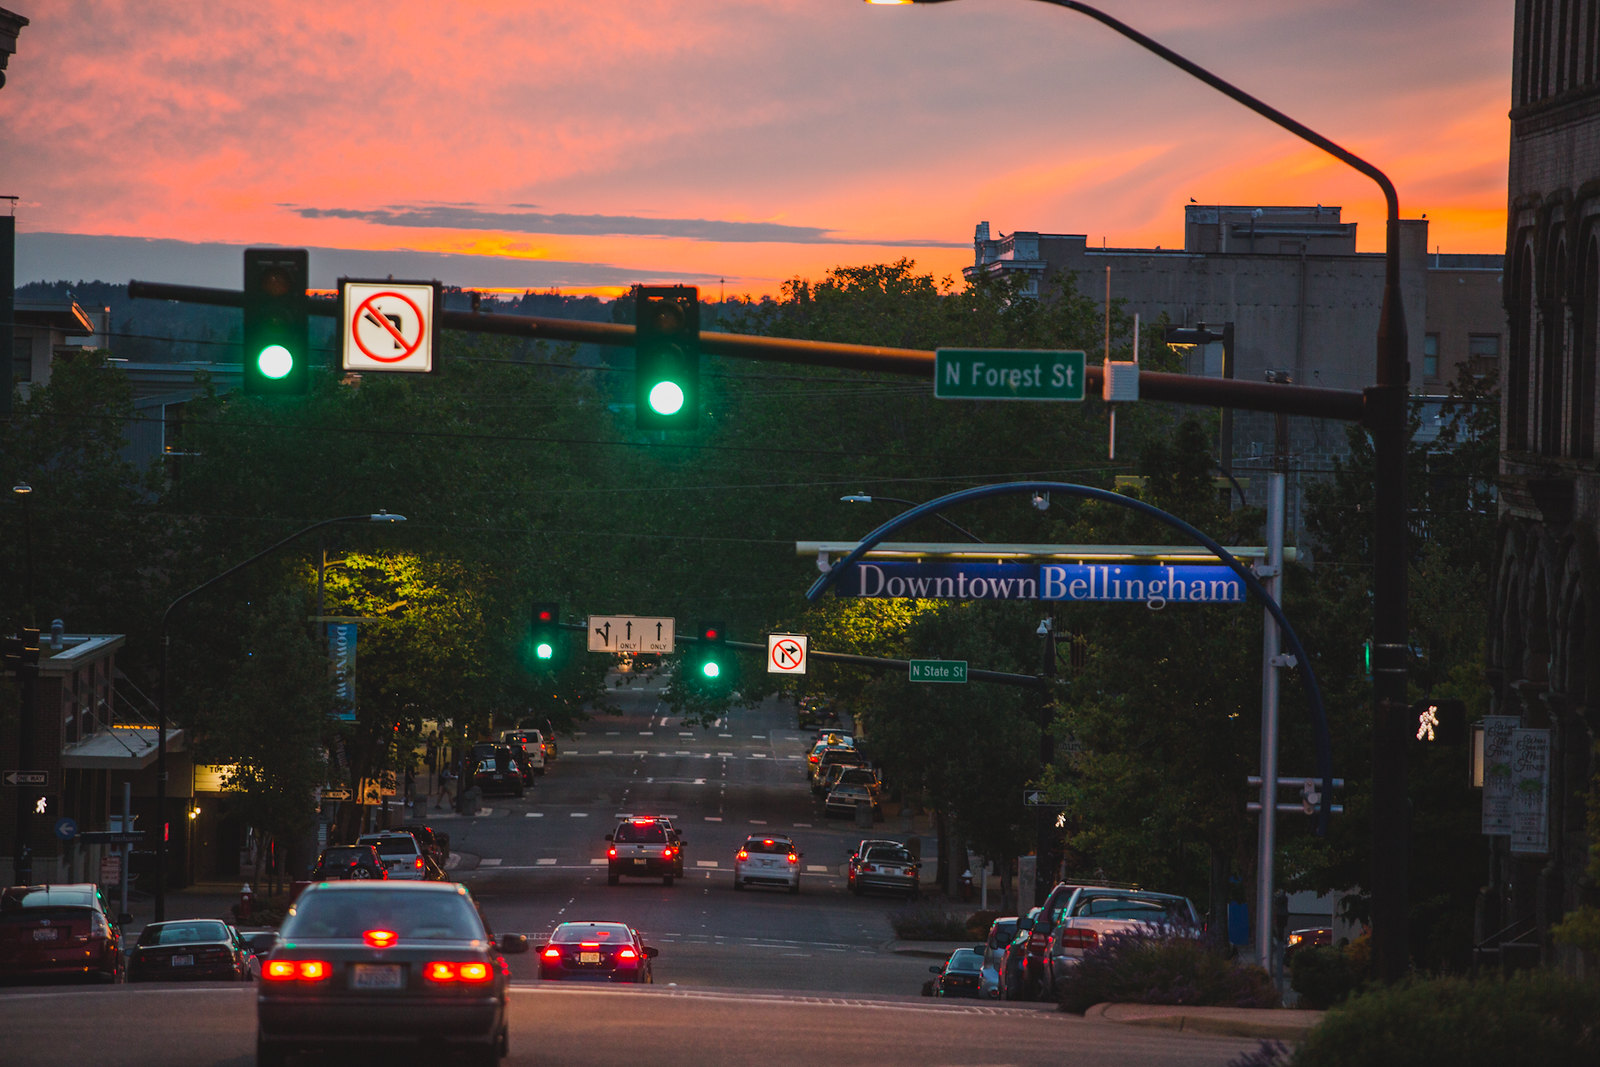 Holly Street in Bellingham at sunset. There are only a few cars on the road and all the traffic lights are green.